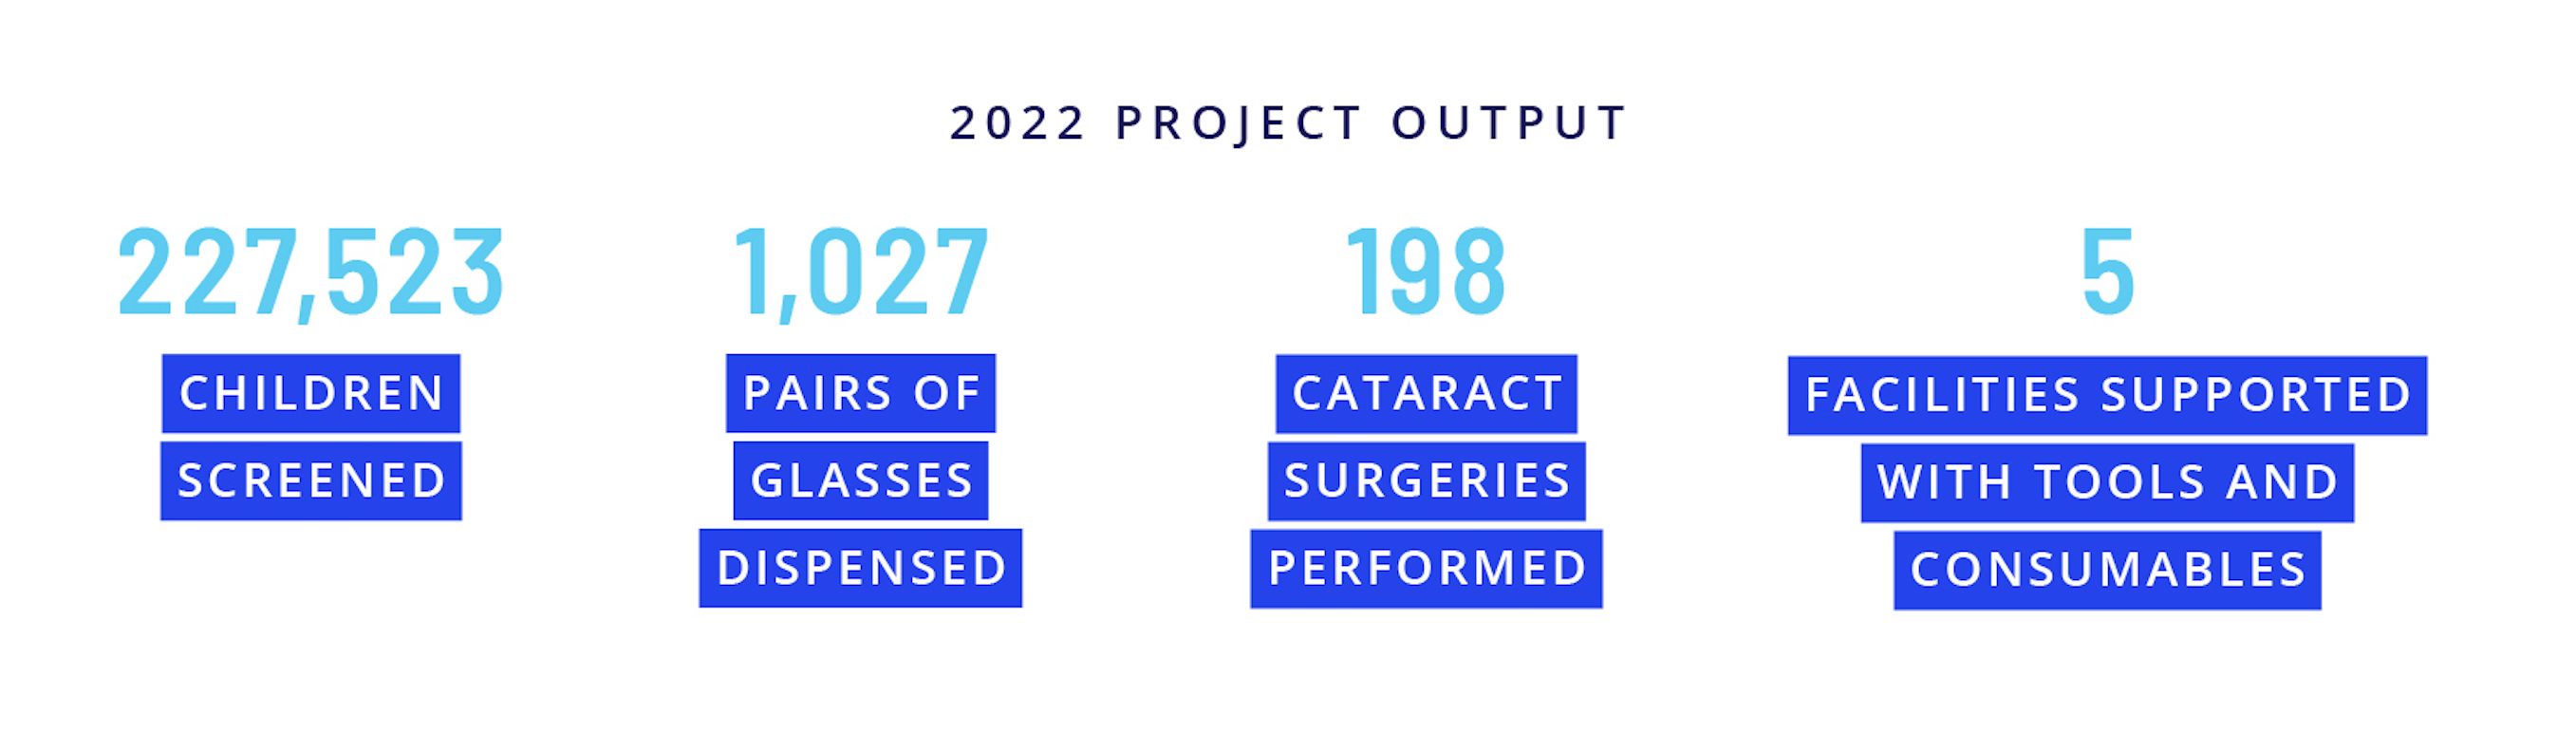 2022 project output